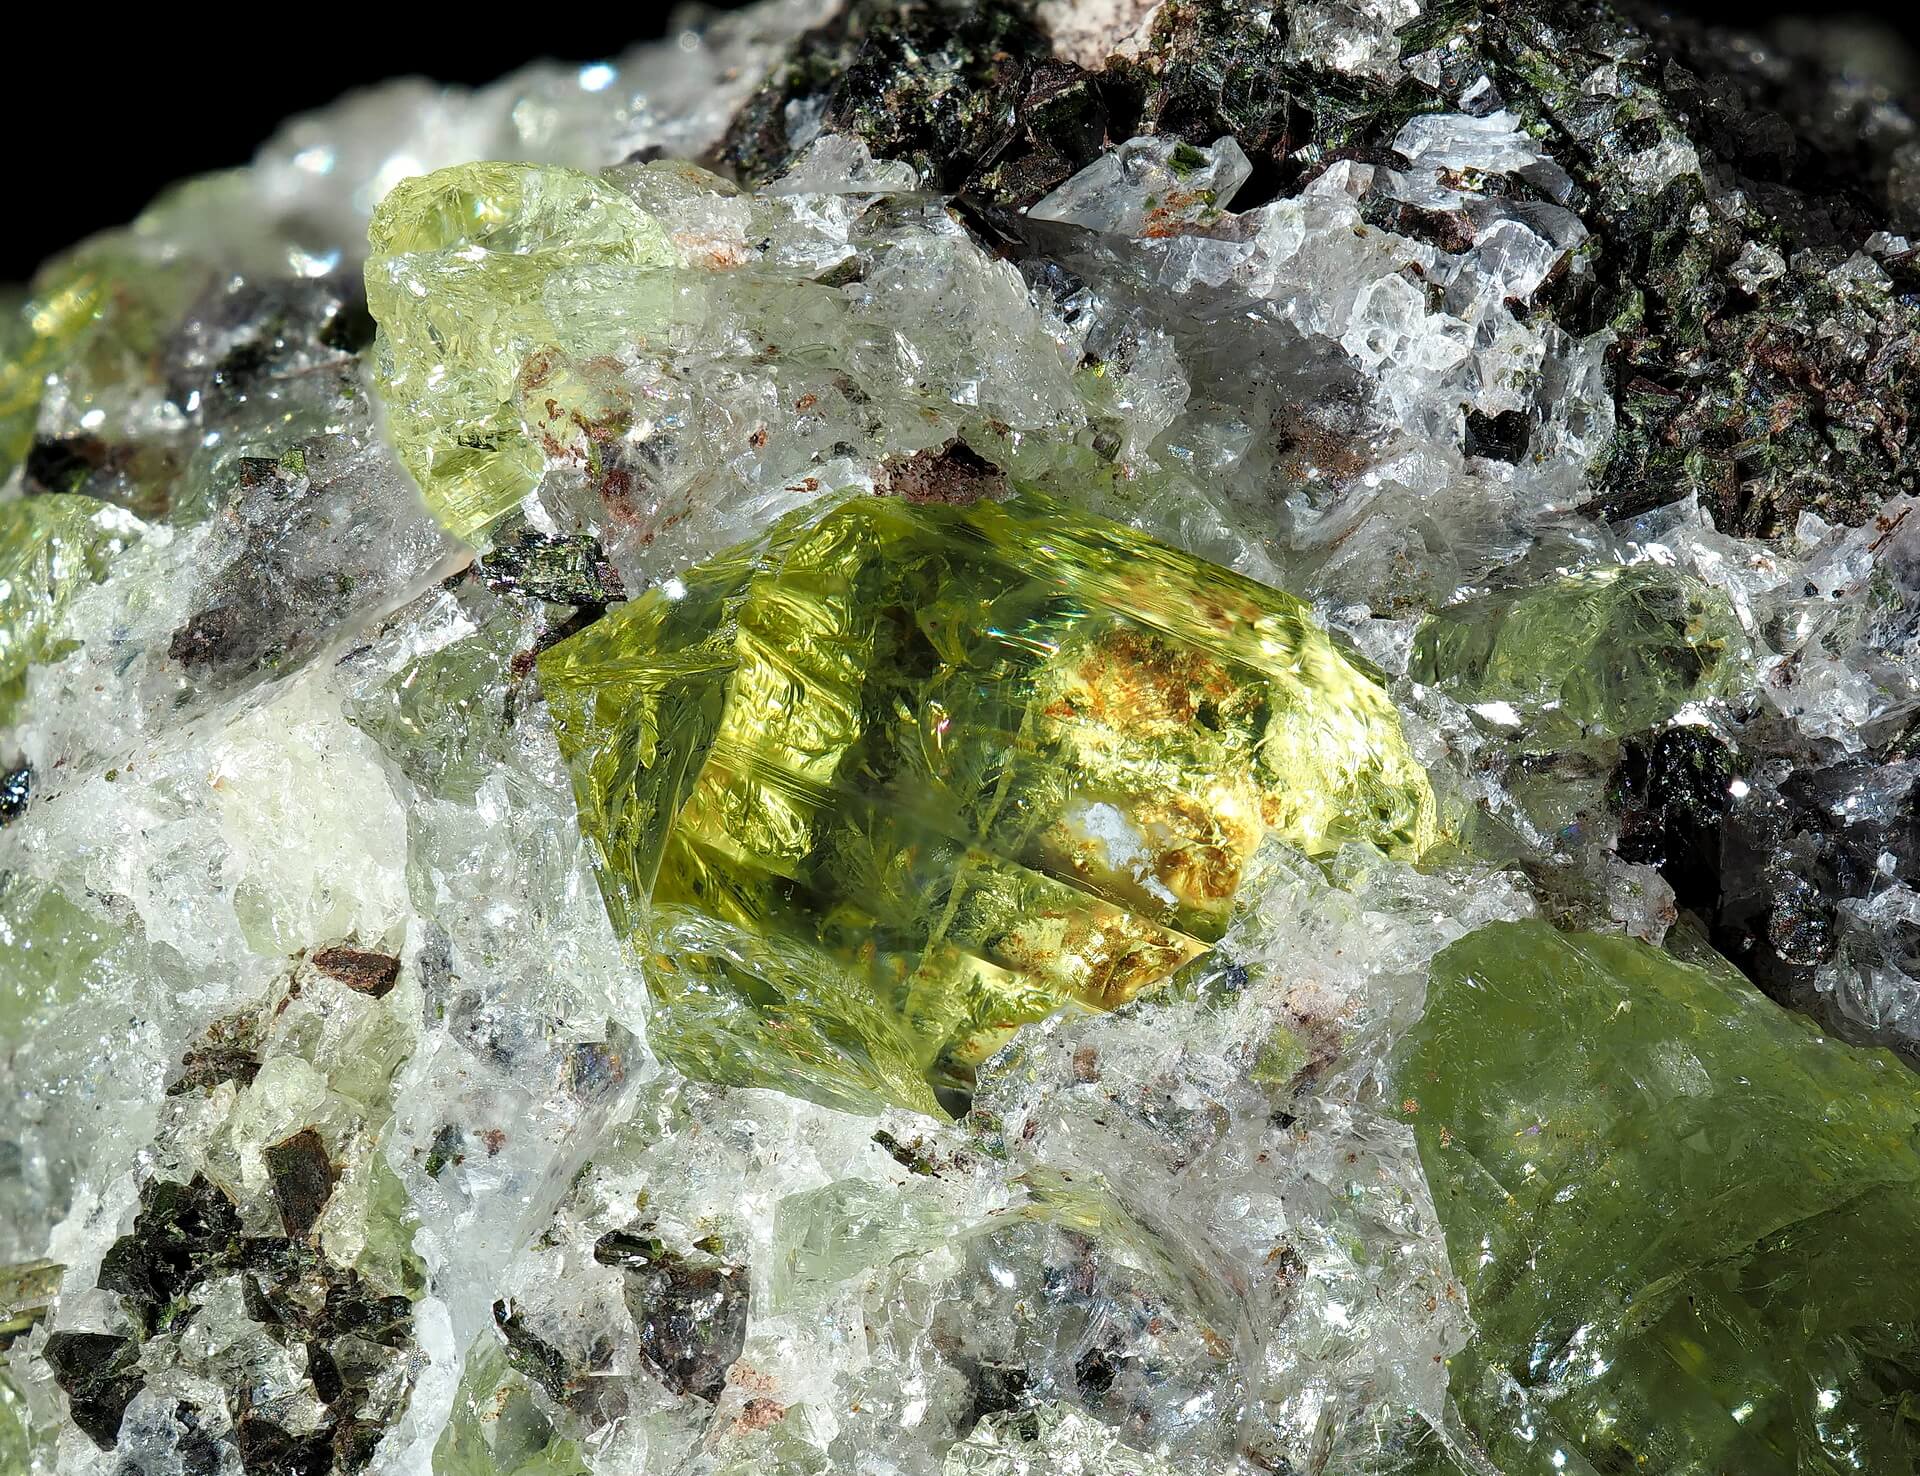 A very clear yellow Apatite crystal surrounded by white Calcite and dark green Augite.